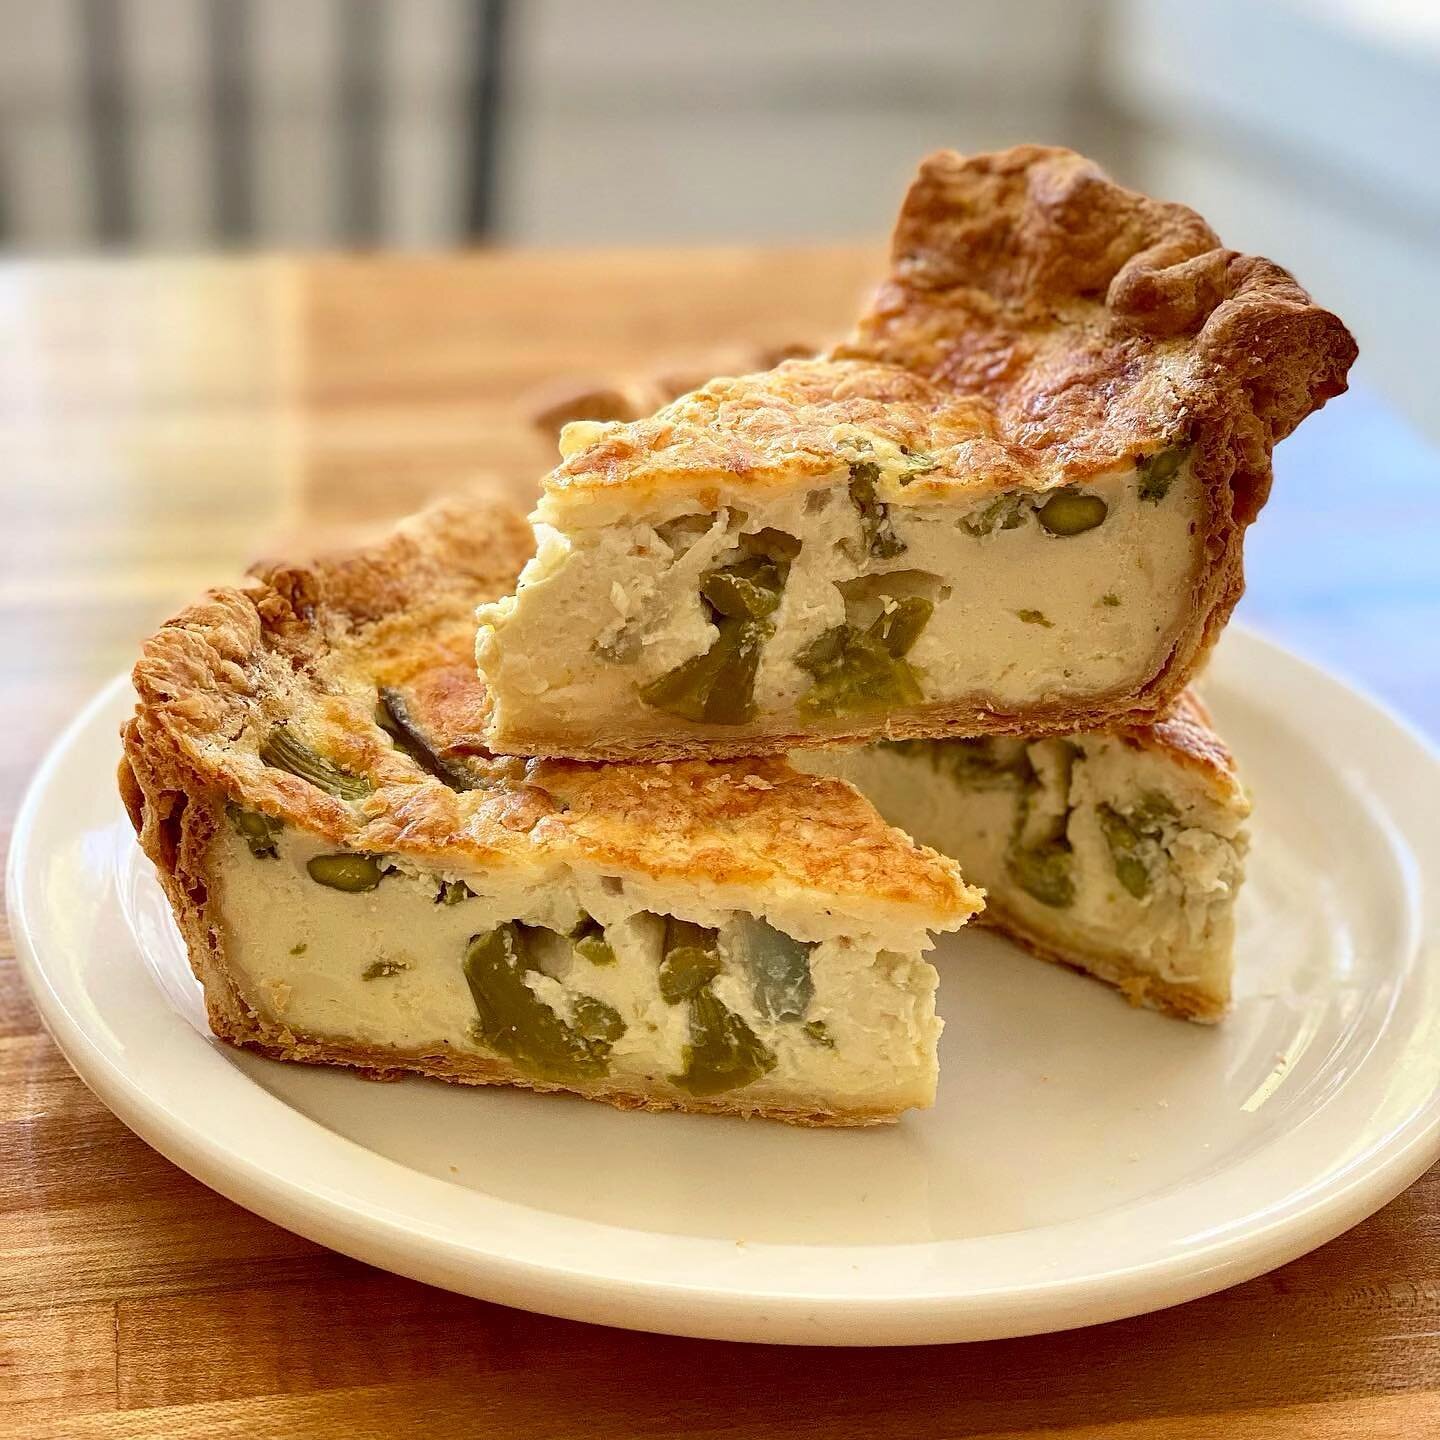 Baking up a lot of quiches today! Remember to get your orders in ASAP to secure one for Easter. Check out our holiday menus on our site now!

If you aren&rsquo;t planning on getting pastries on Easter Sunday, please help us help you by selecting a Fr